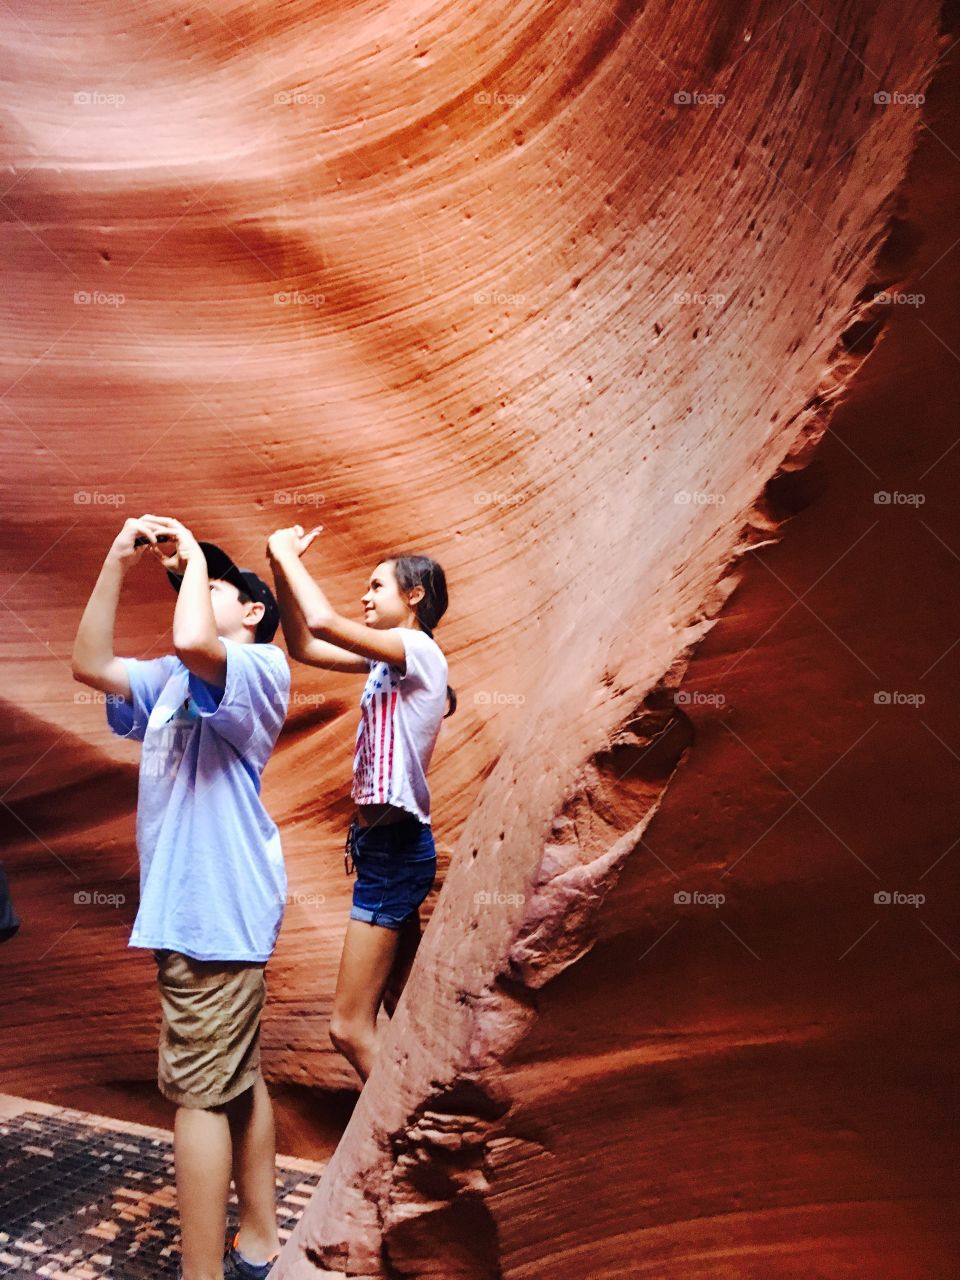 Photography in the canyon